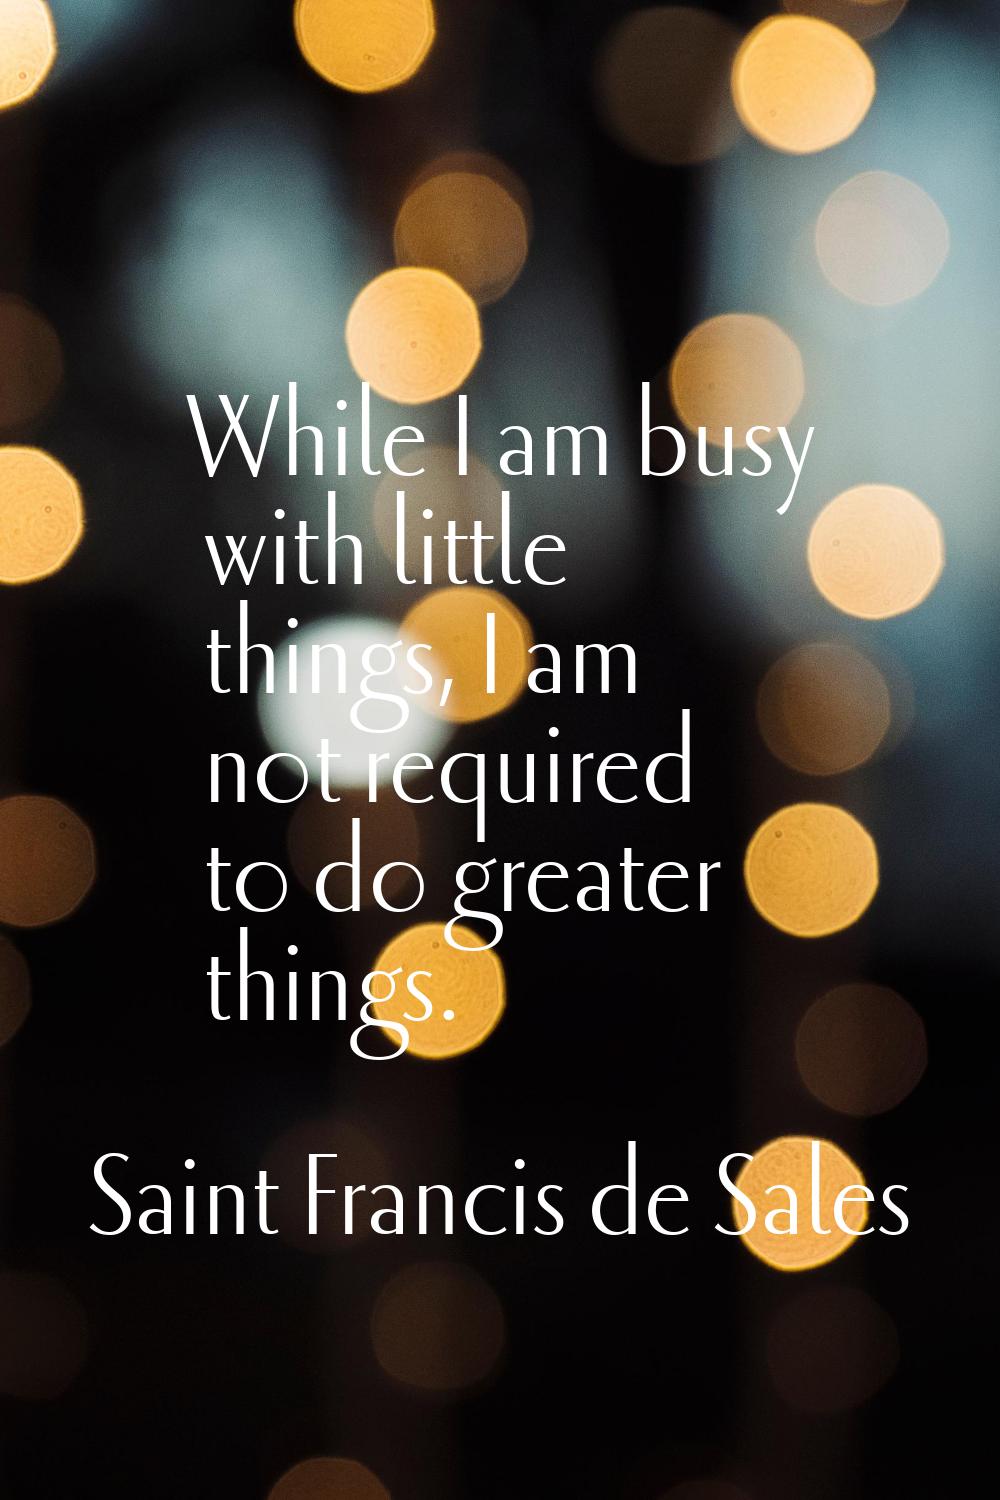 While I am busy with little things, I am not required to do greater things.